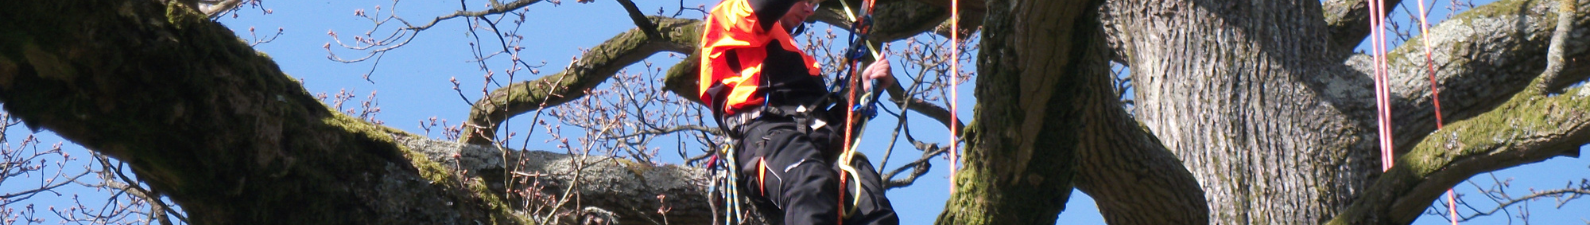 harnesses for tree climbing